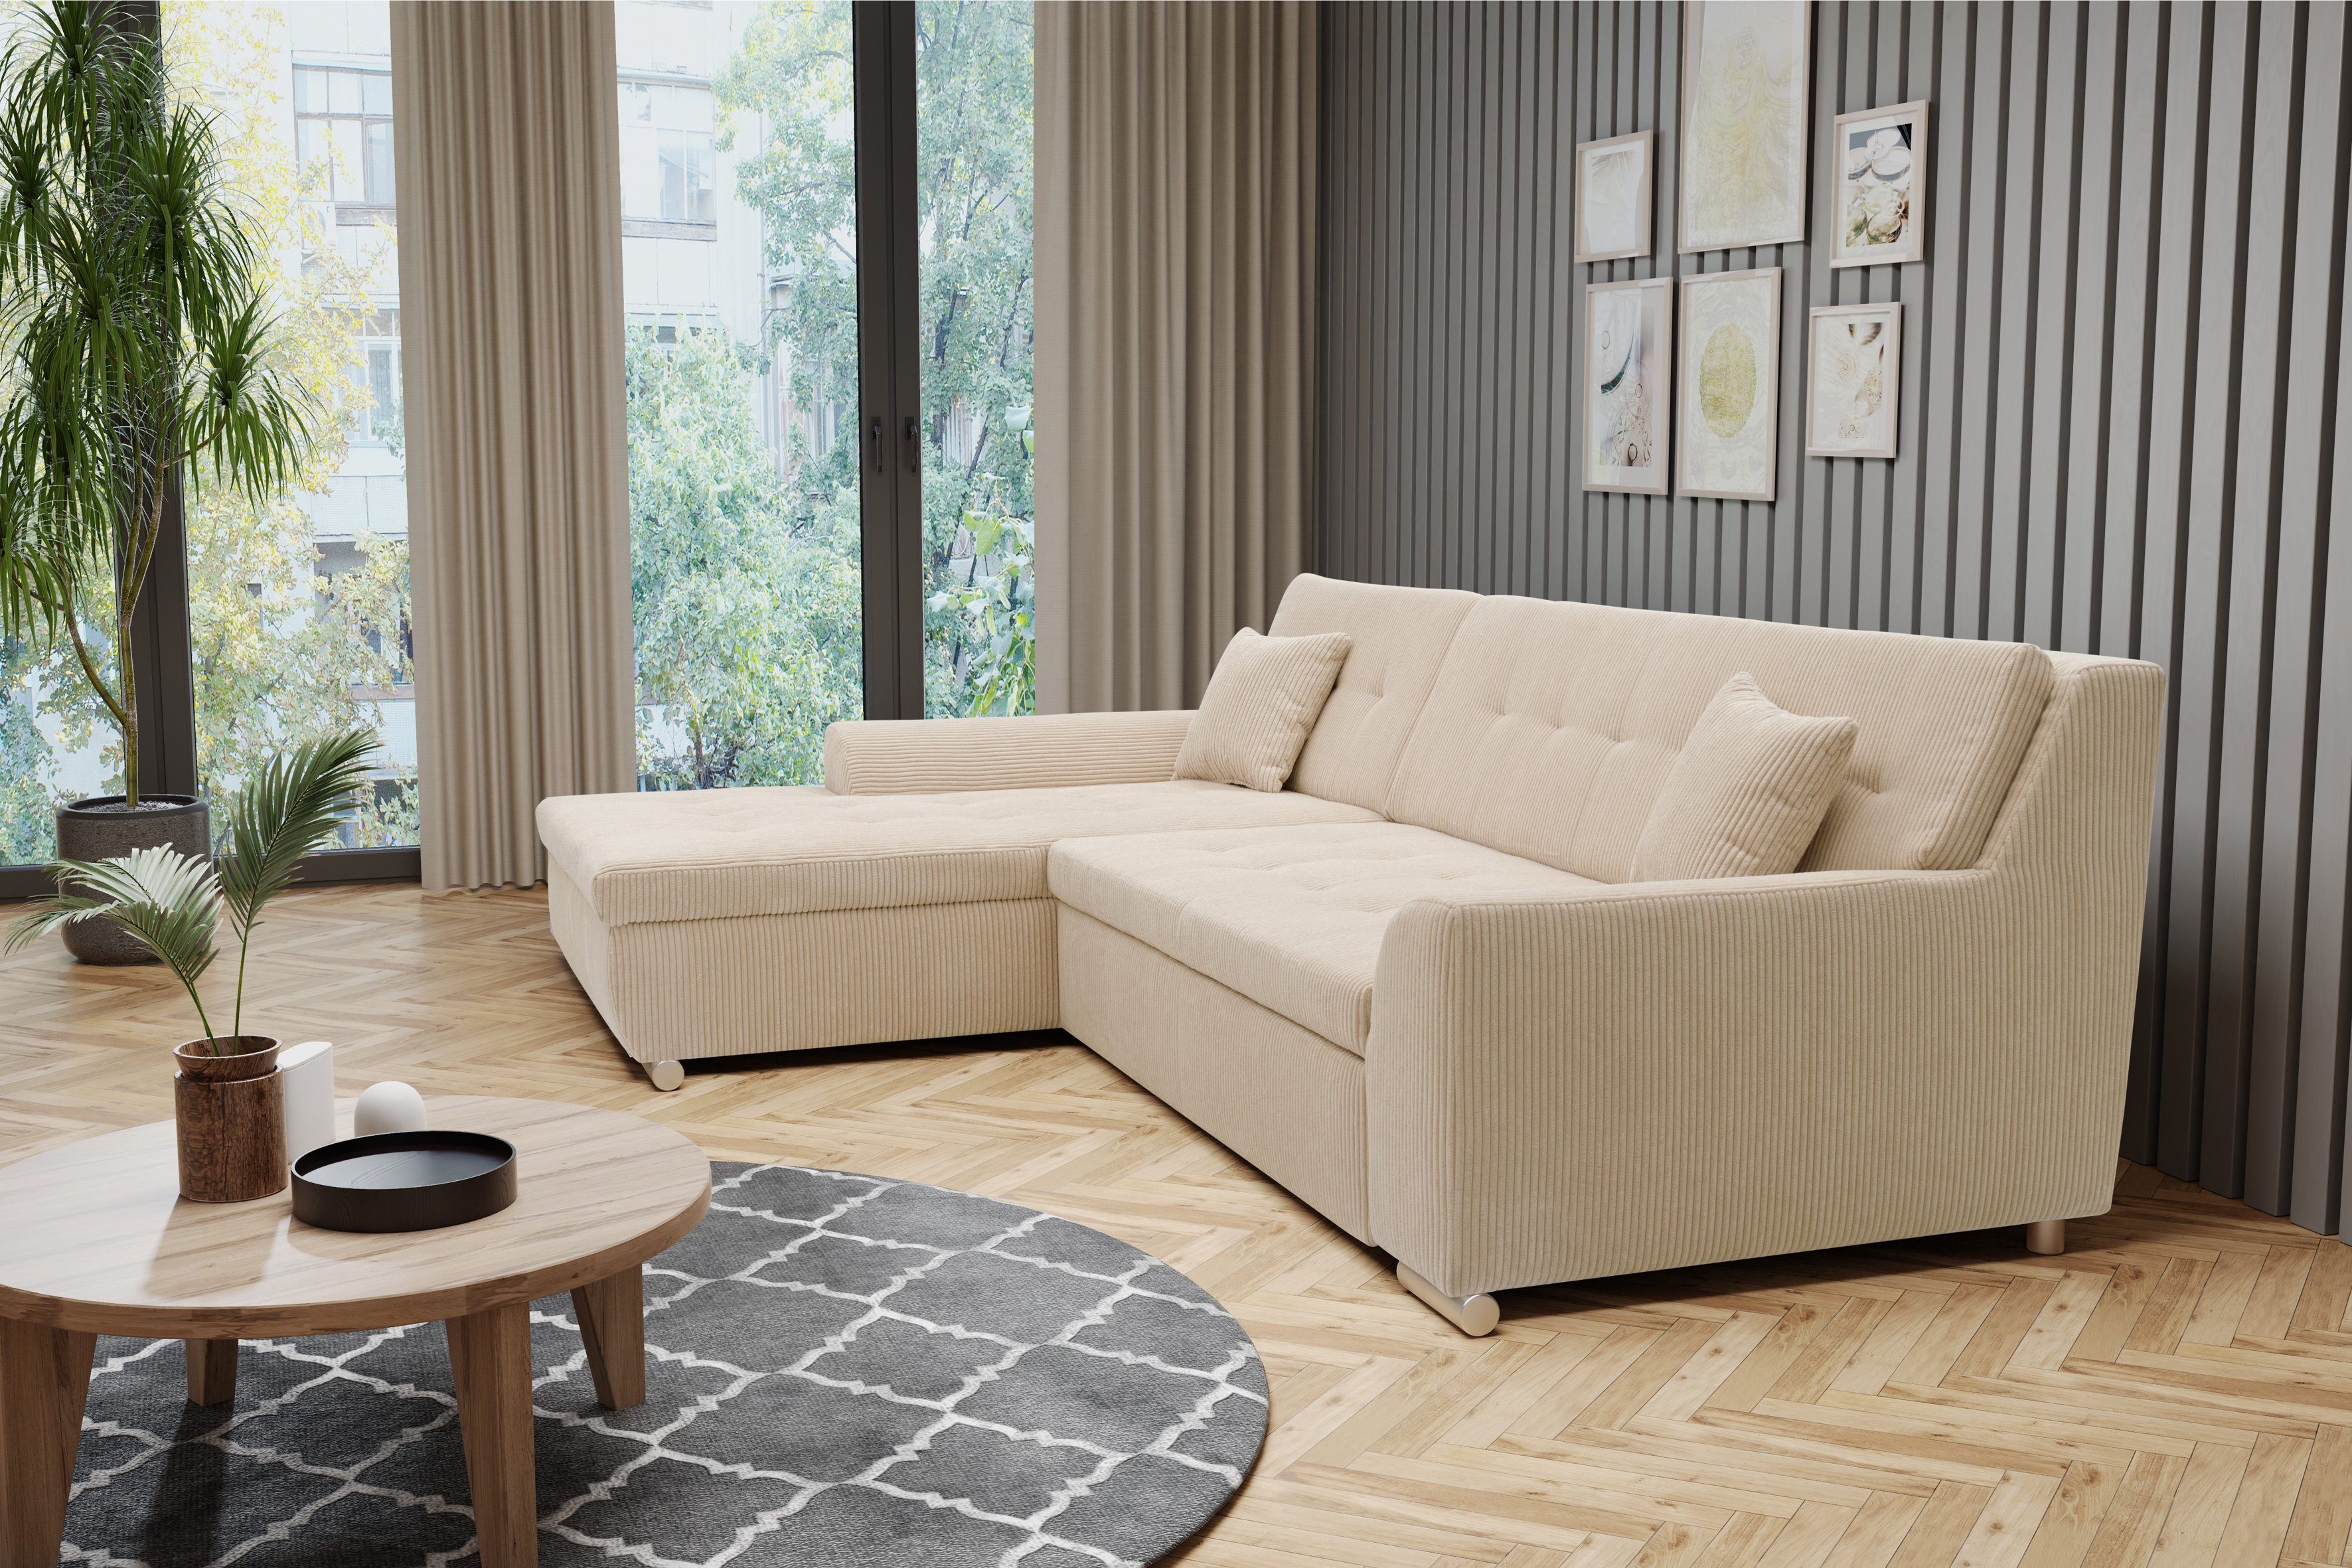 DOMO collection Ecksofa Treviso, Bettfunktion, auch Cord wahlweise mit in